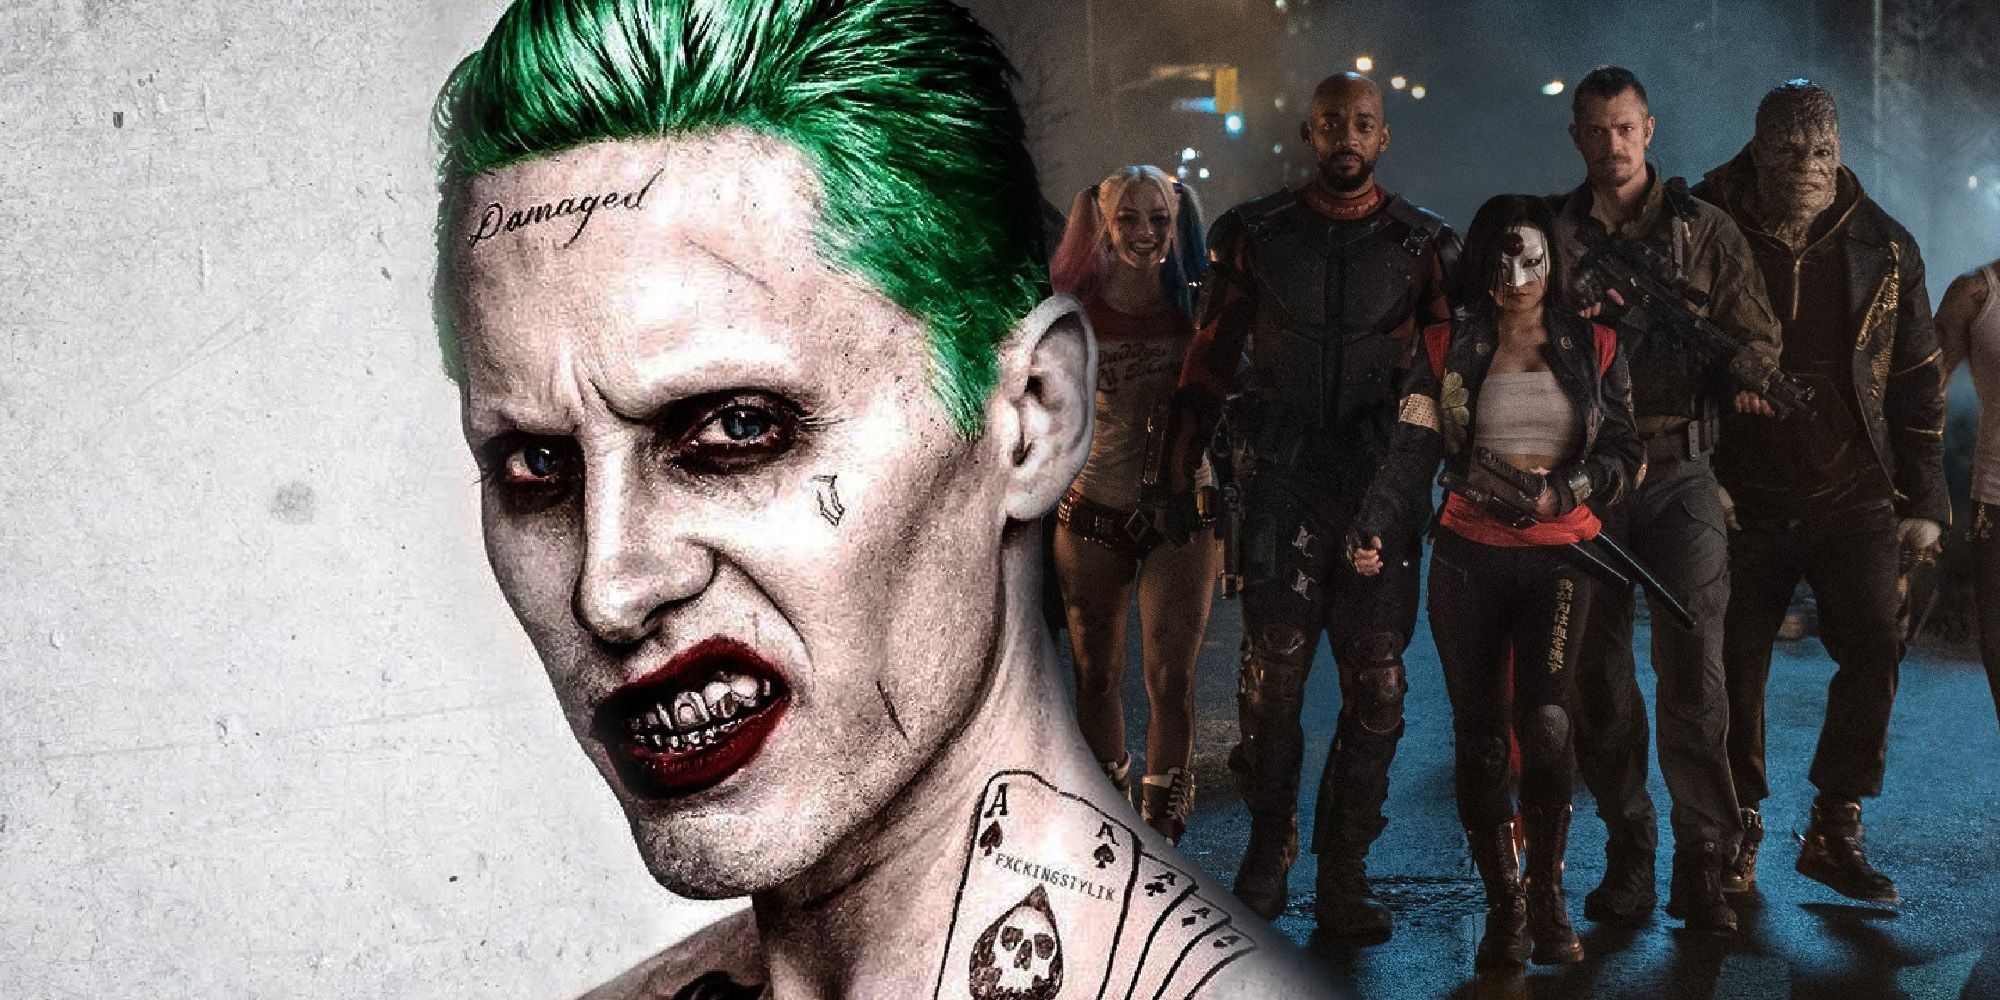 New 'Suicide Squad' cut might show more Joker footage